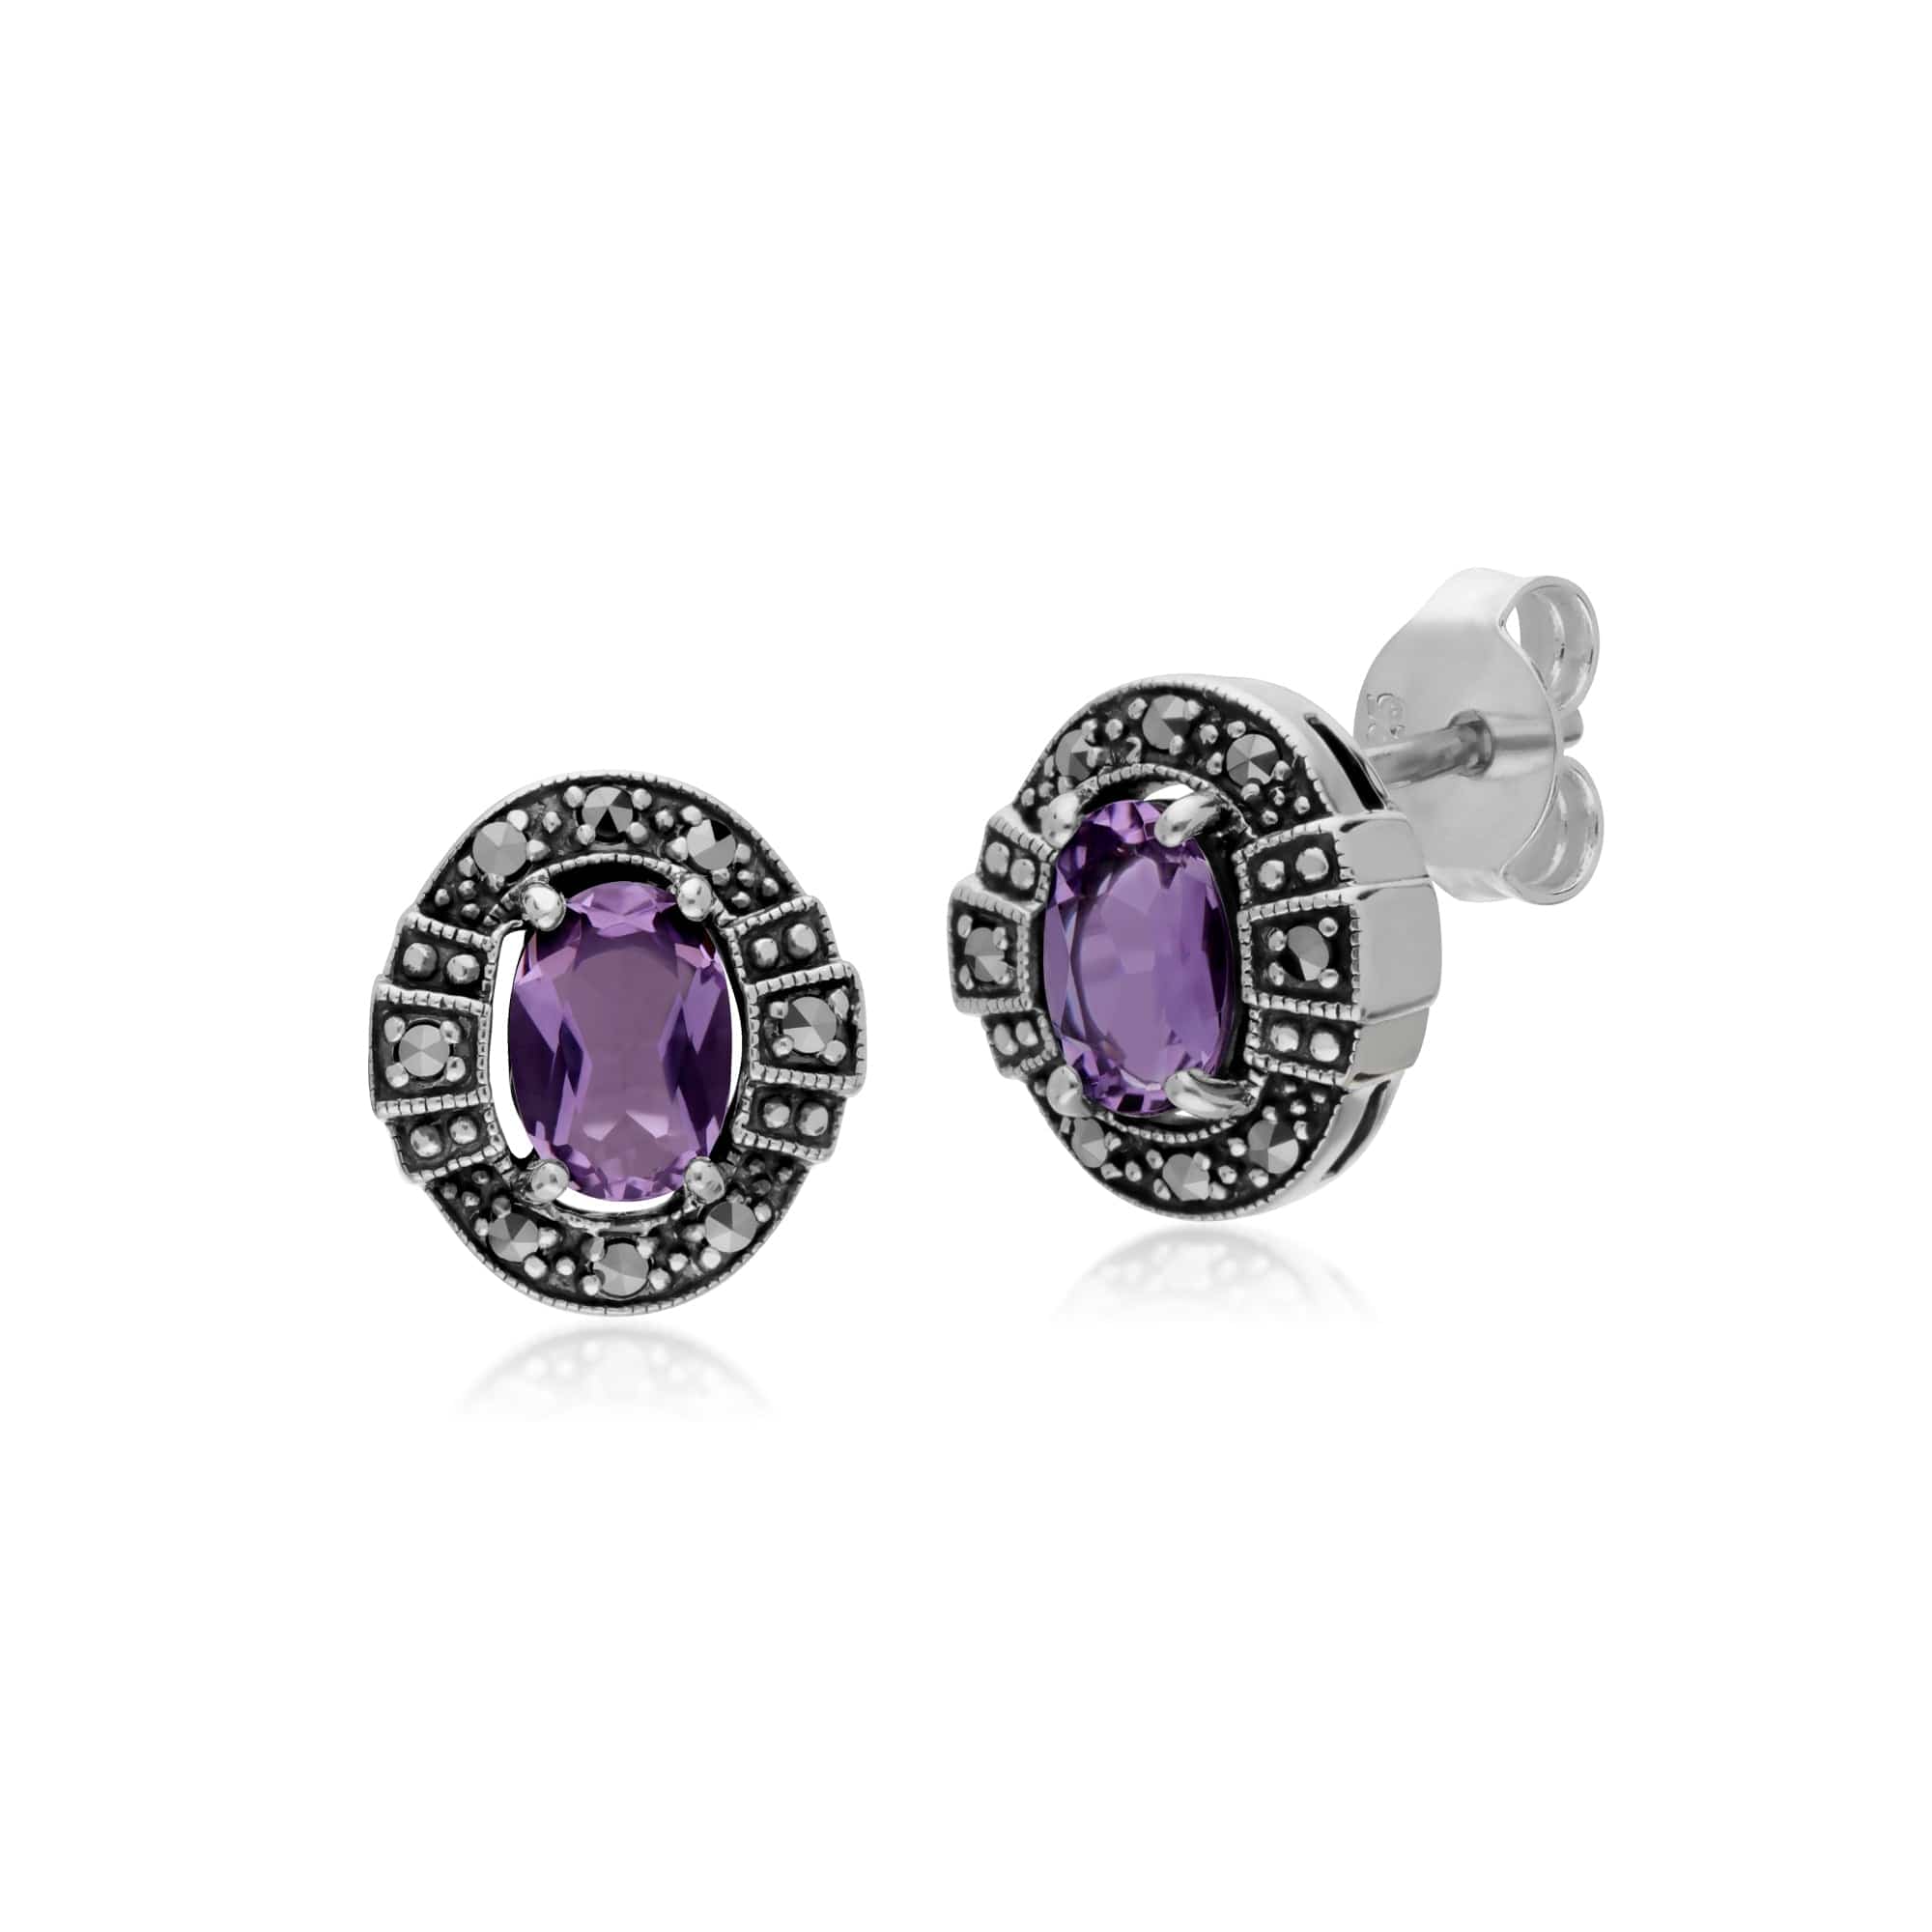 214E873002925-214R605702925 Art Deco Style Oval Amethyst and Marcasite Cluster Stud Earrings & Ring Set in 925 Sterling Silver 2